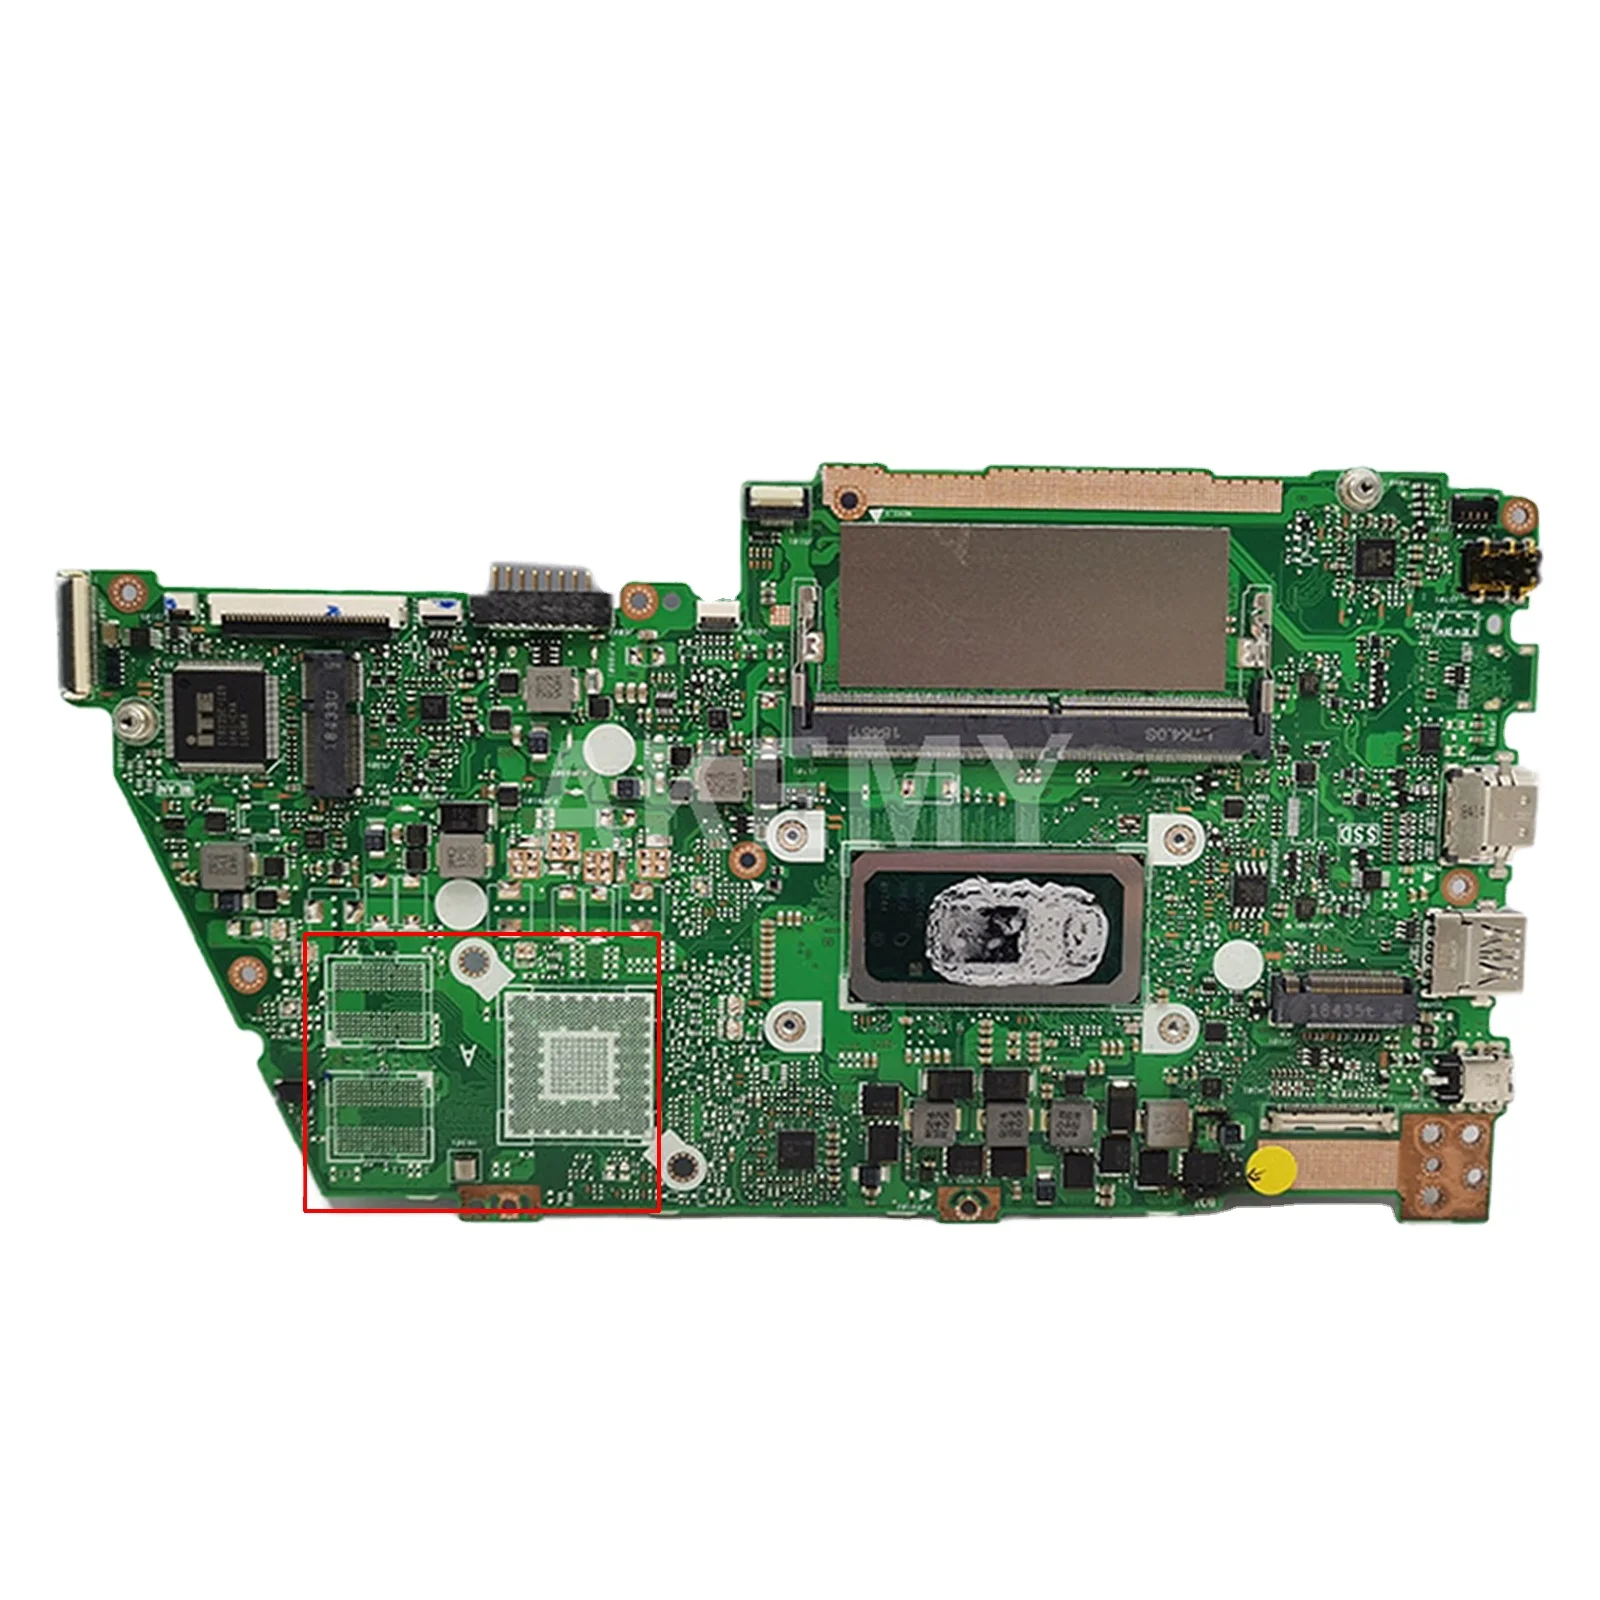 

X430FA Laptop Motherboard for ASUS VIVOBOOK X430F X430 A430F S14 S4300F S4300FN Motherboard Mainboard CPU I3 I5 I7 UMA 4GB 8GB